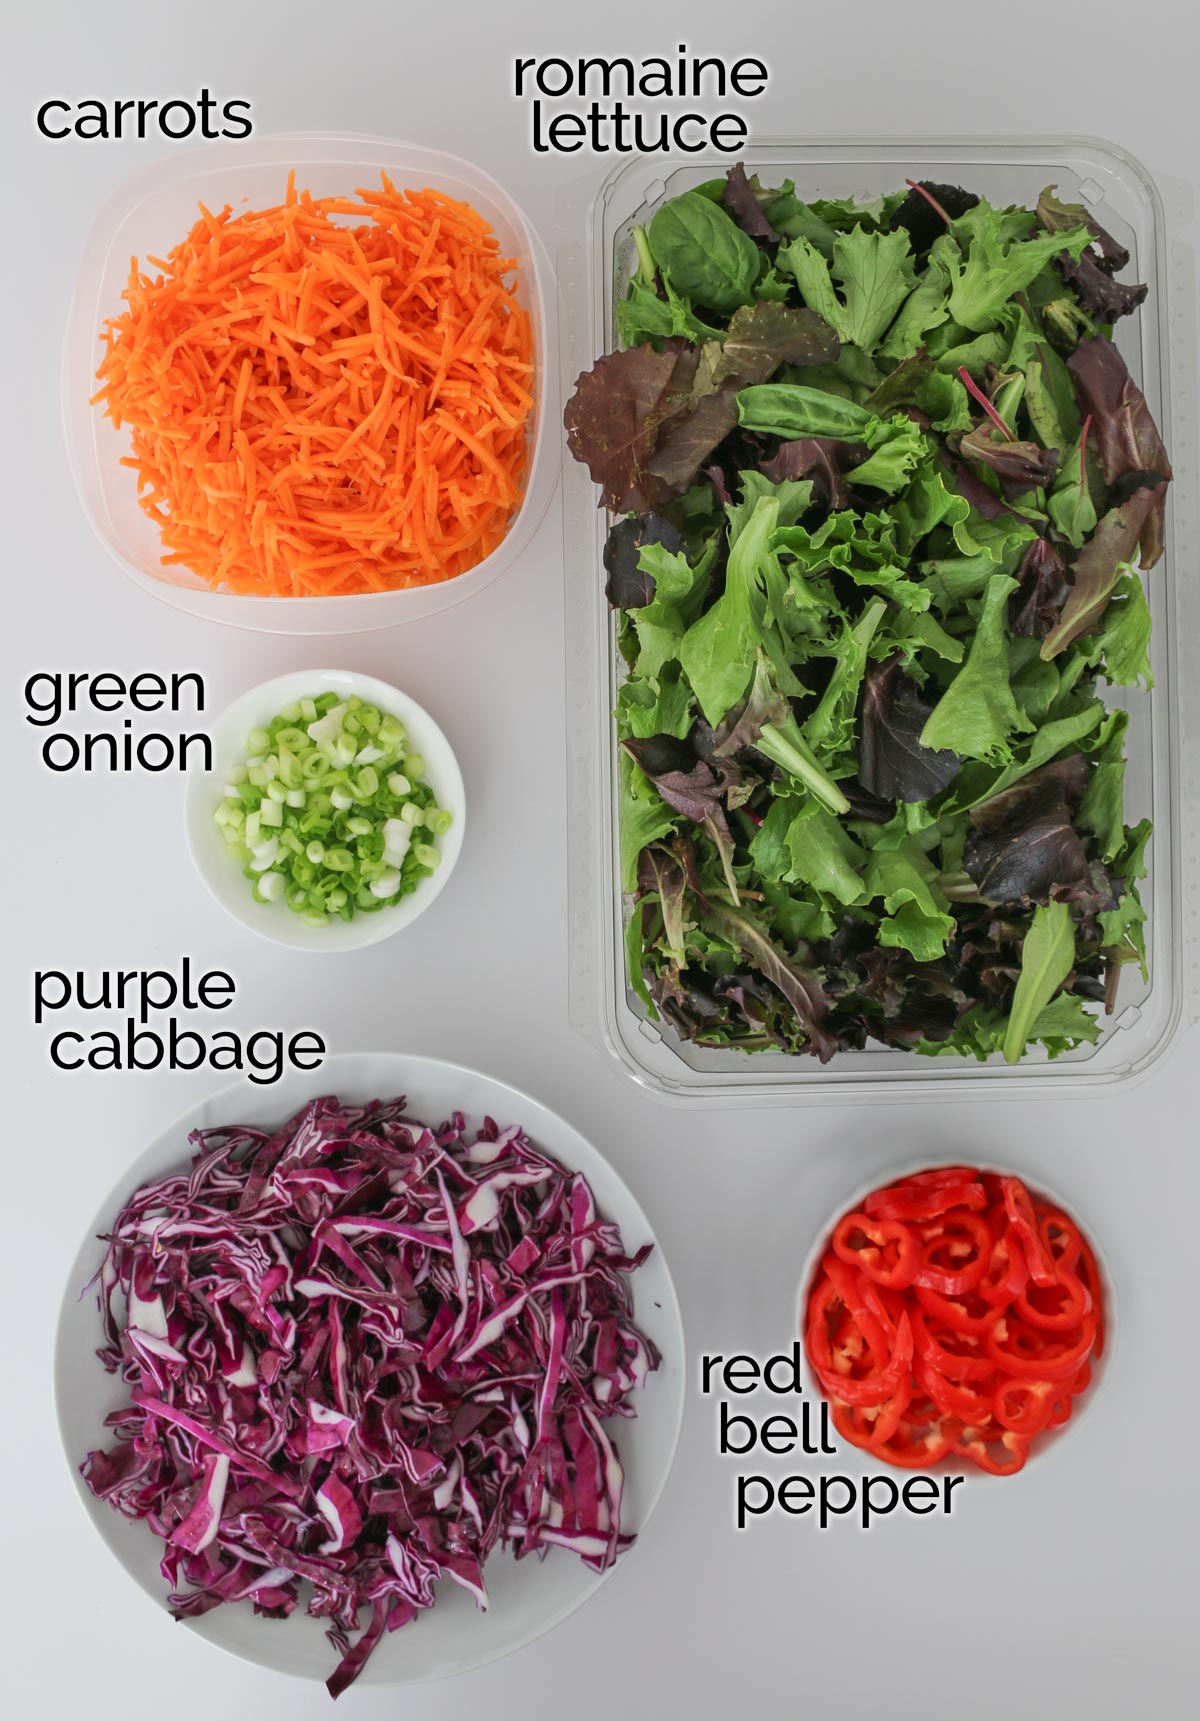 20 Meal Prep Salads That You'll Actually Enjoy Eating - Workweek Lunch